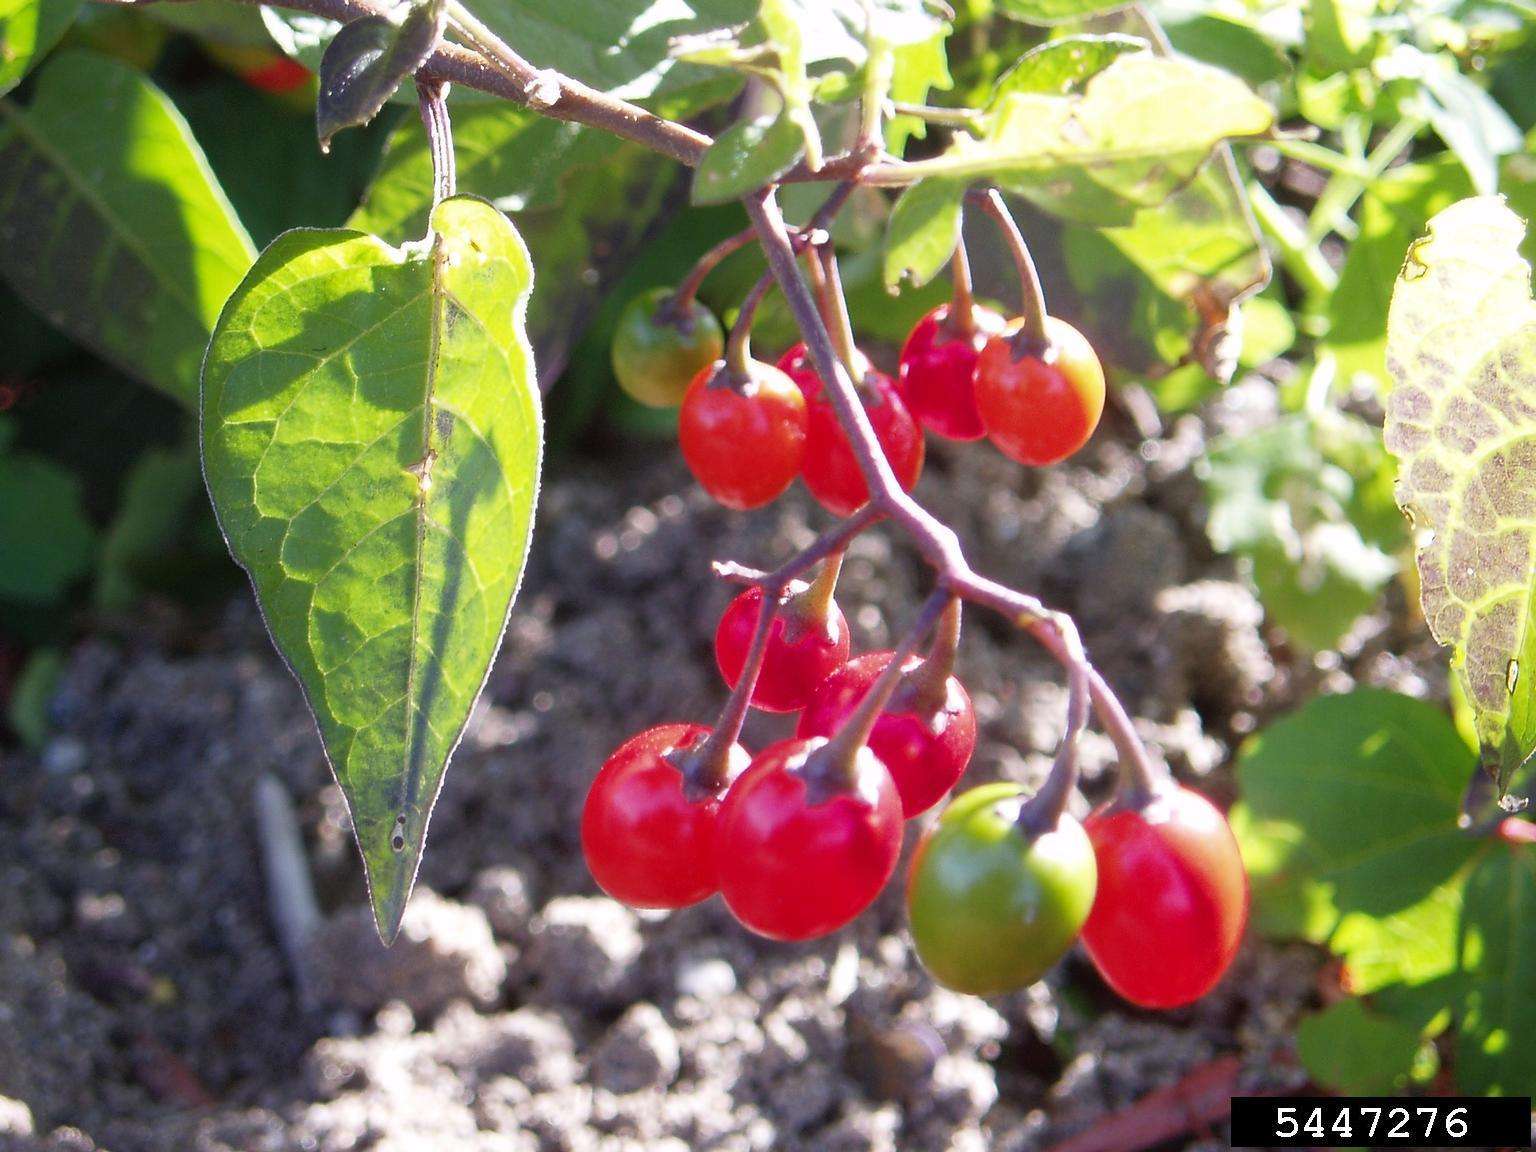 Bright red berry-shaped fruit on a bittersweet plant.